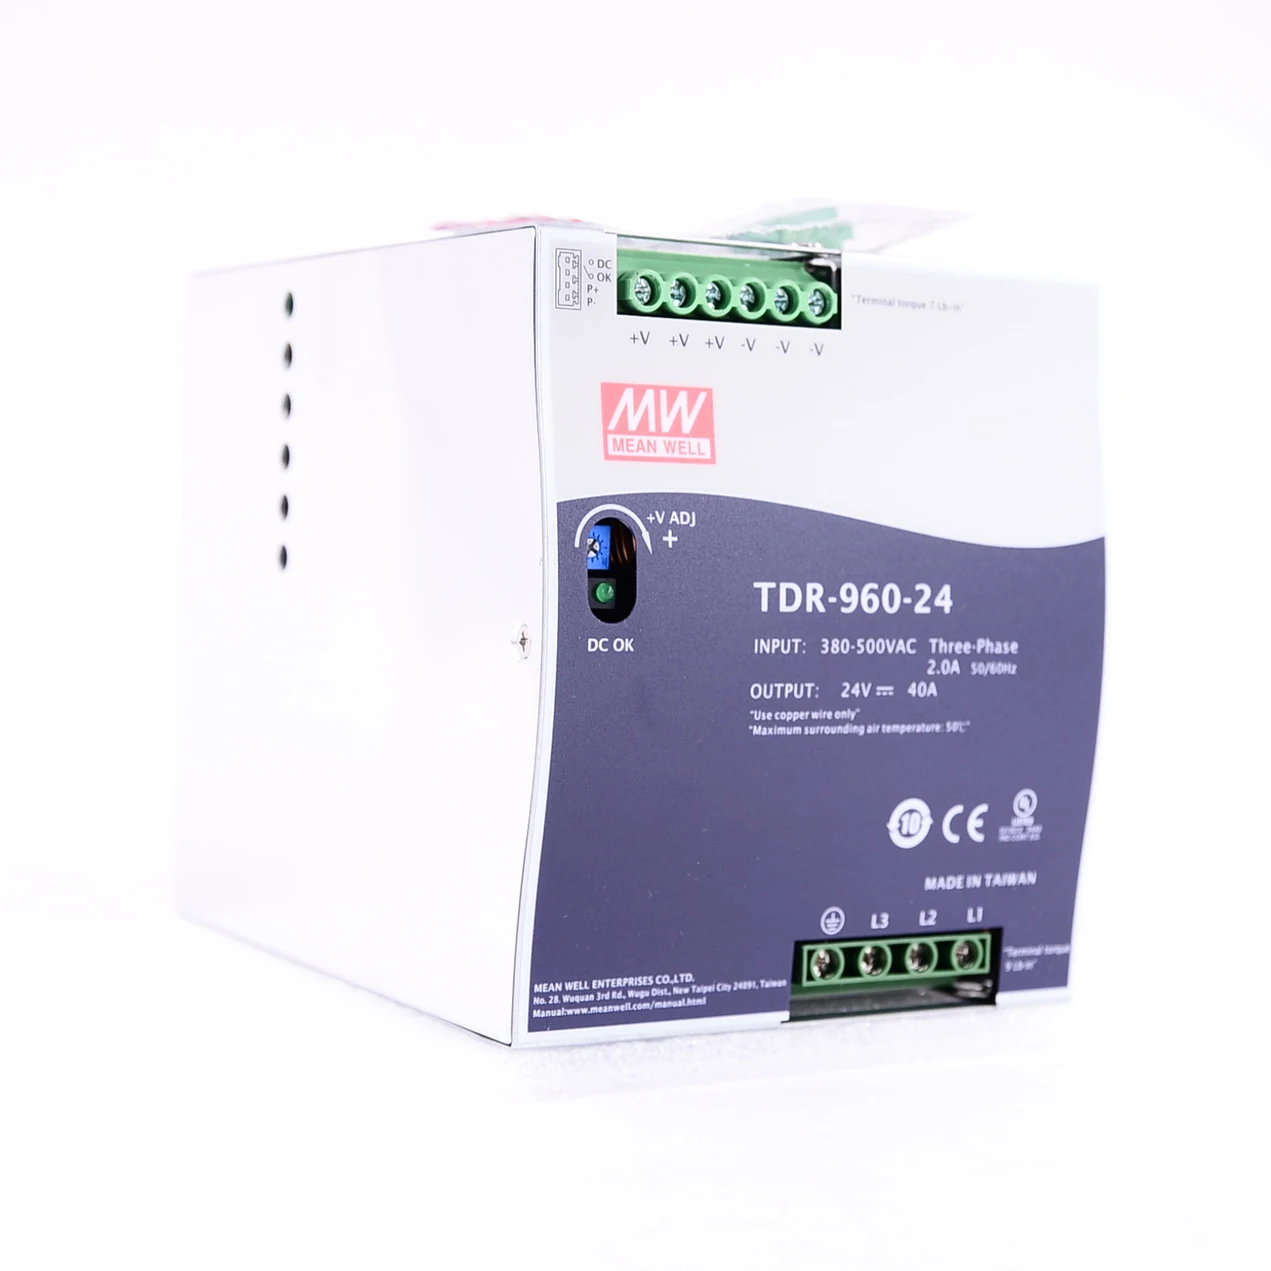 

Original Mean Well TDR-960-24 meanwell DC 24V 40A 960W Three Phase Industrial DIN Rail with PFC Function Power Supply